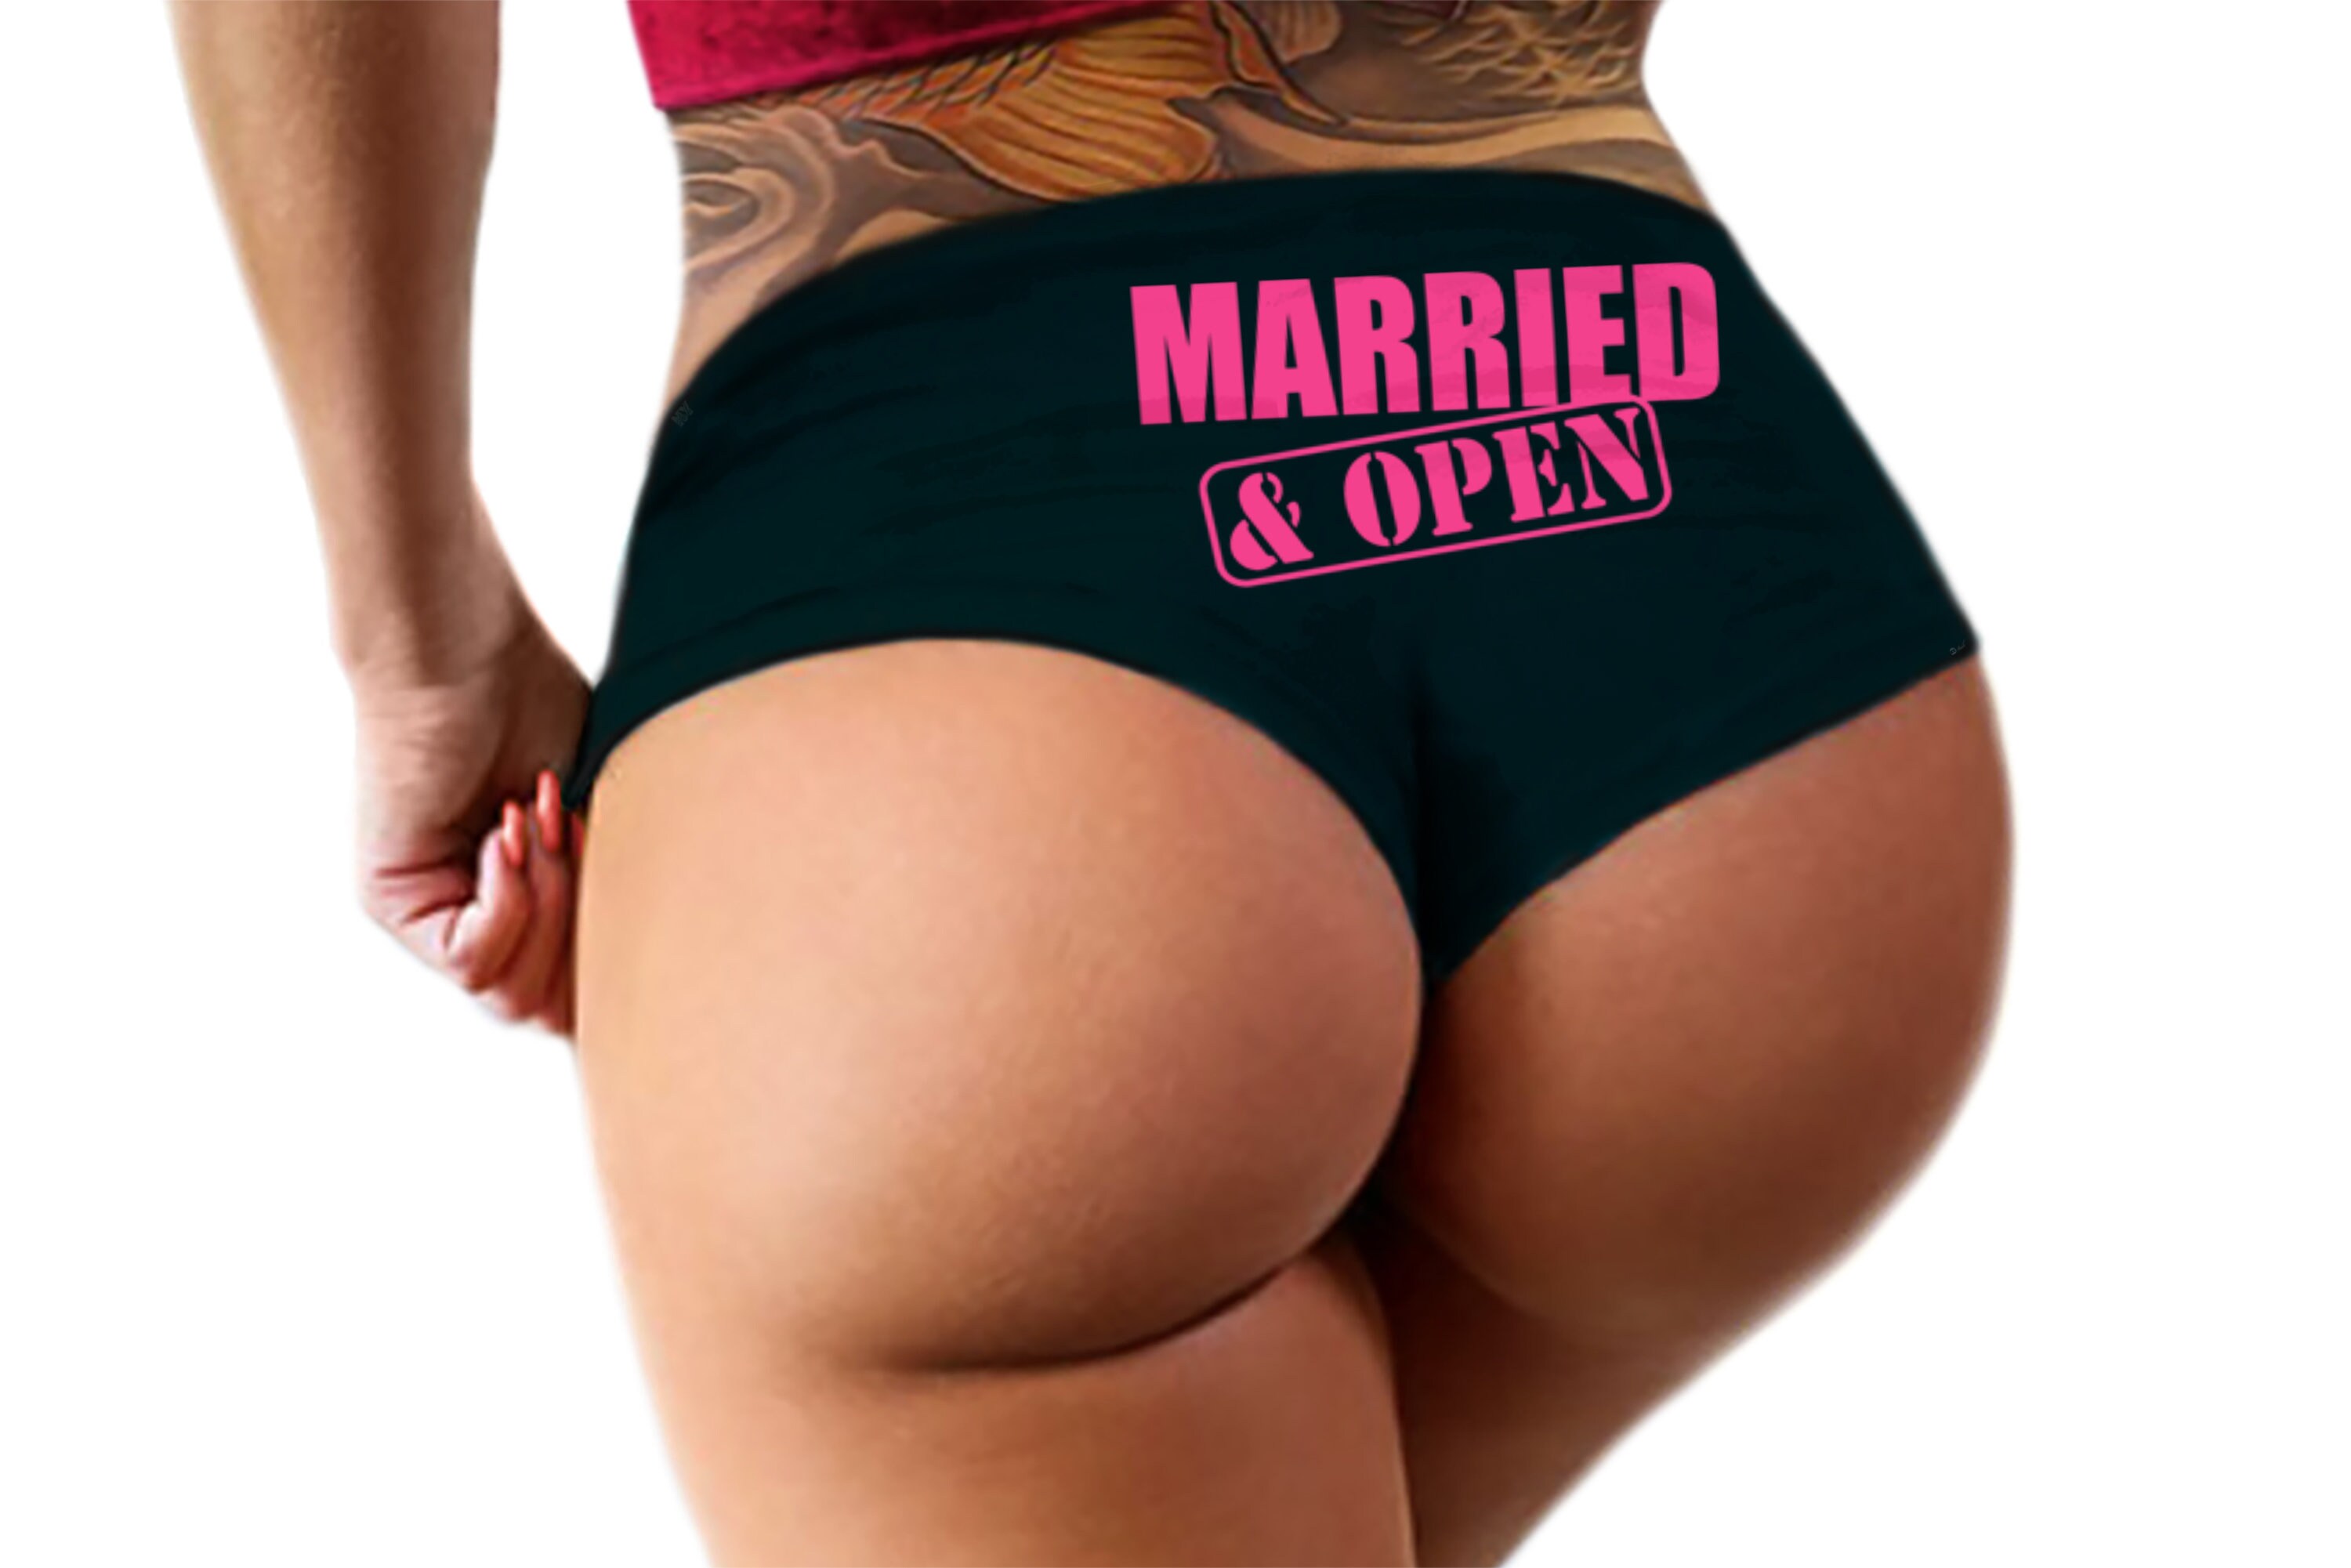 Off The Market Ring Engaged Married Funny Women's Boyshort Underwear Panties 